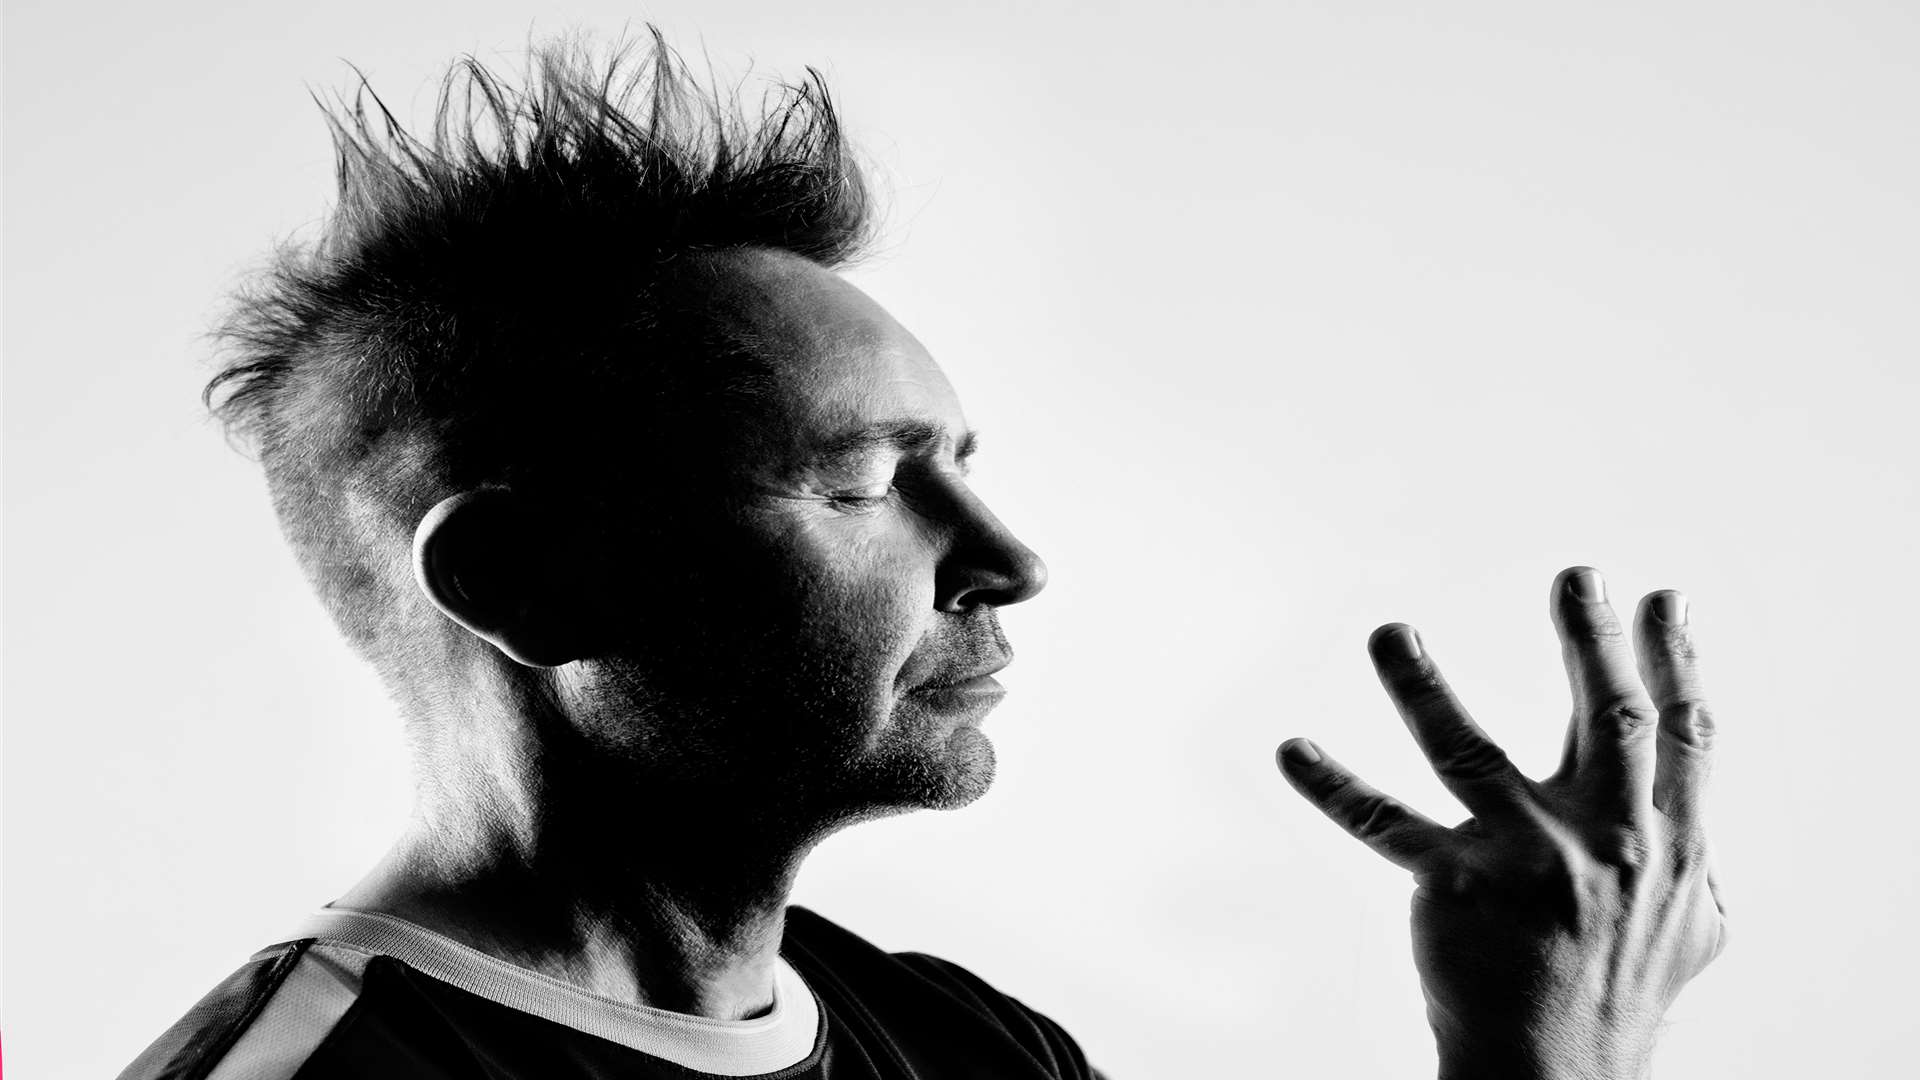 Nigel Kennedy plays Hendrix at the Brighton Dome, in a concert presented by Rye Jazz Festival